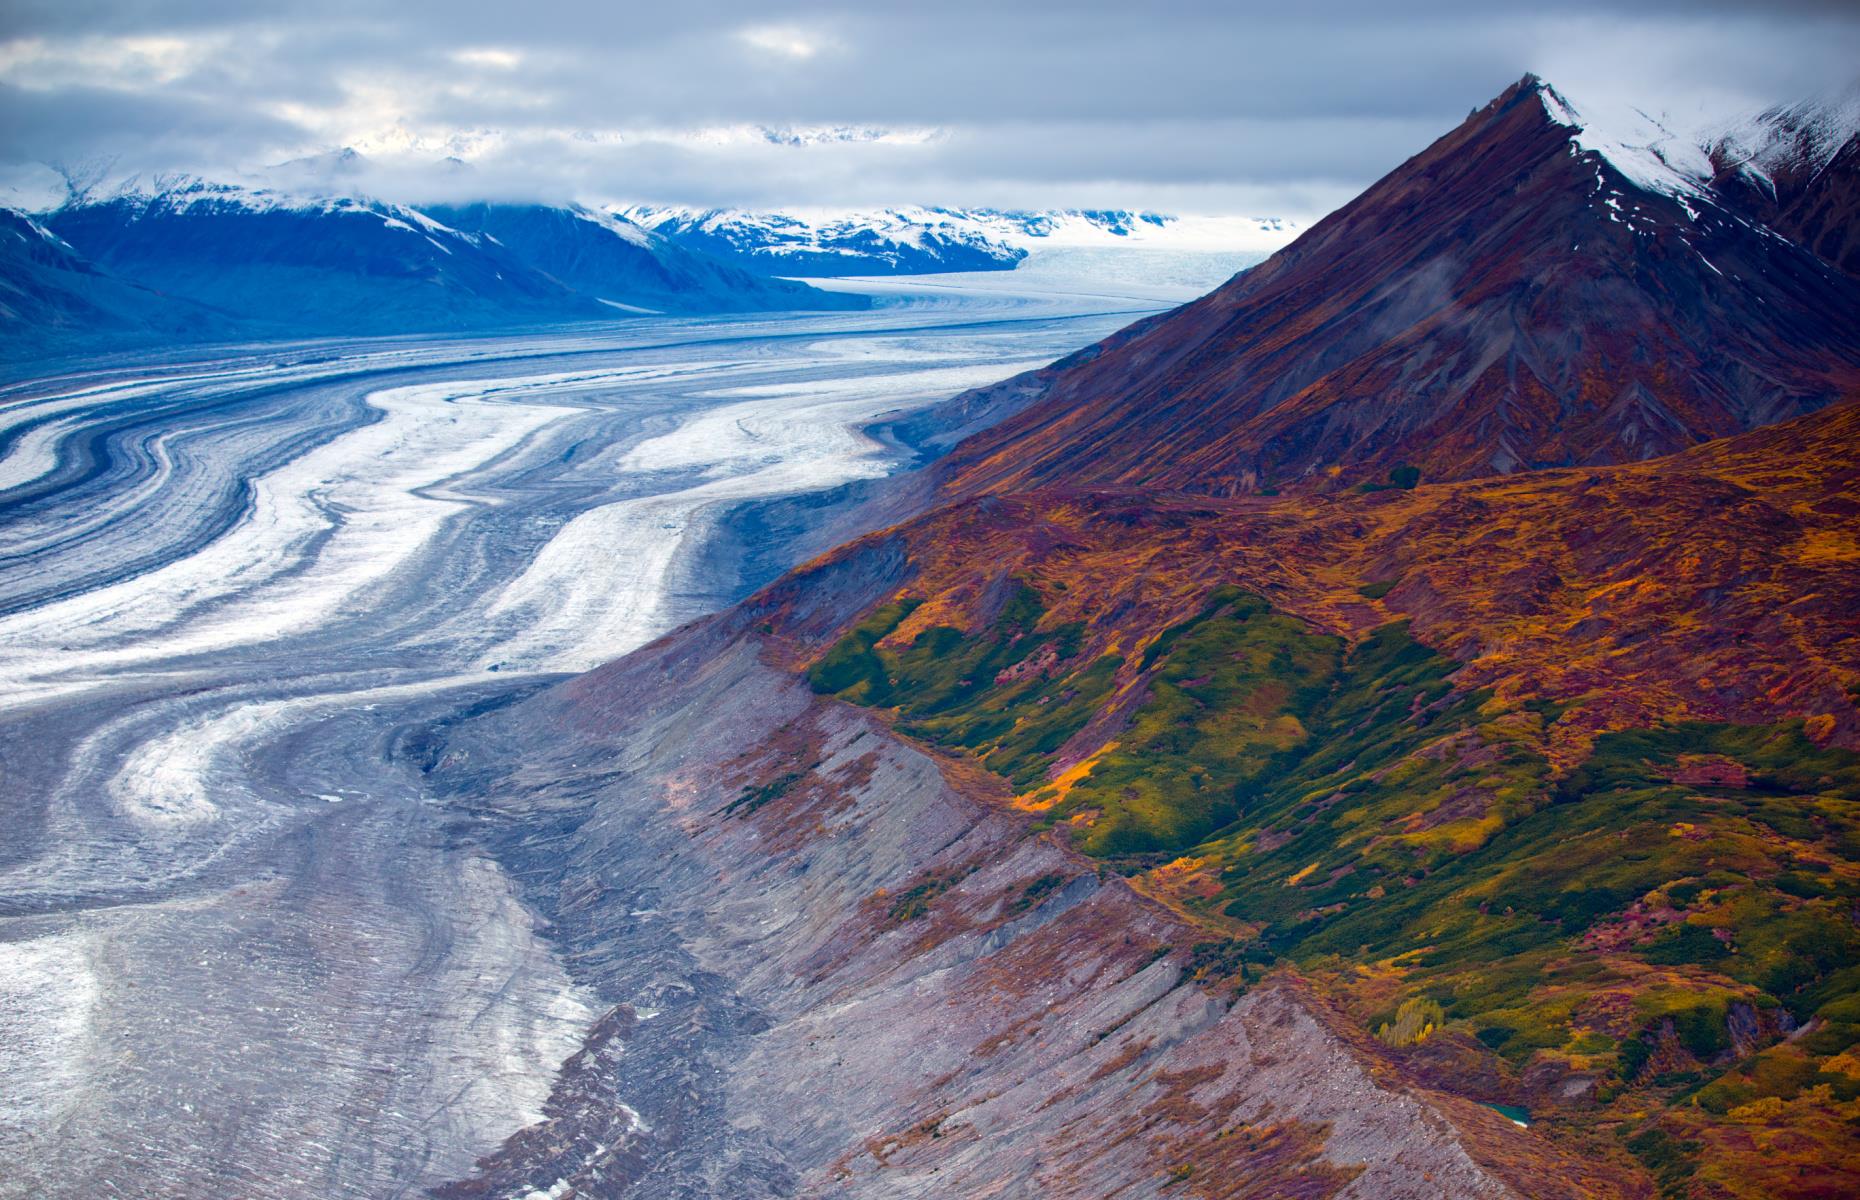 <p>As the traditional land of the Southern Tutchone people, Kluane consists of two parts: an official national park that's the result of successful land settlement, and another section that remains a reserve while the Government of Canada tries to reach <a href="https://parks.canada.ca/pn-np/yt/kluane/gestion-management/plan">an agreement with local First Nations</a>. The park is managed in partnership with Kluane First Nation and Champagne and Aishihik First Nations with ongoing efforts to ensure that the nations’ rights, cultural resources and interests are protected.</p>